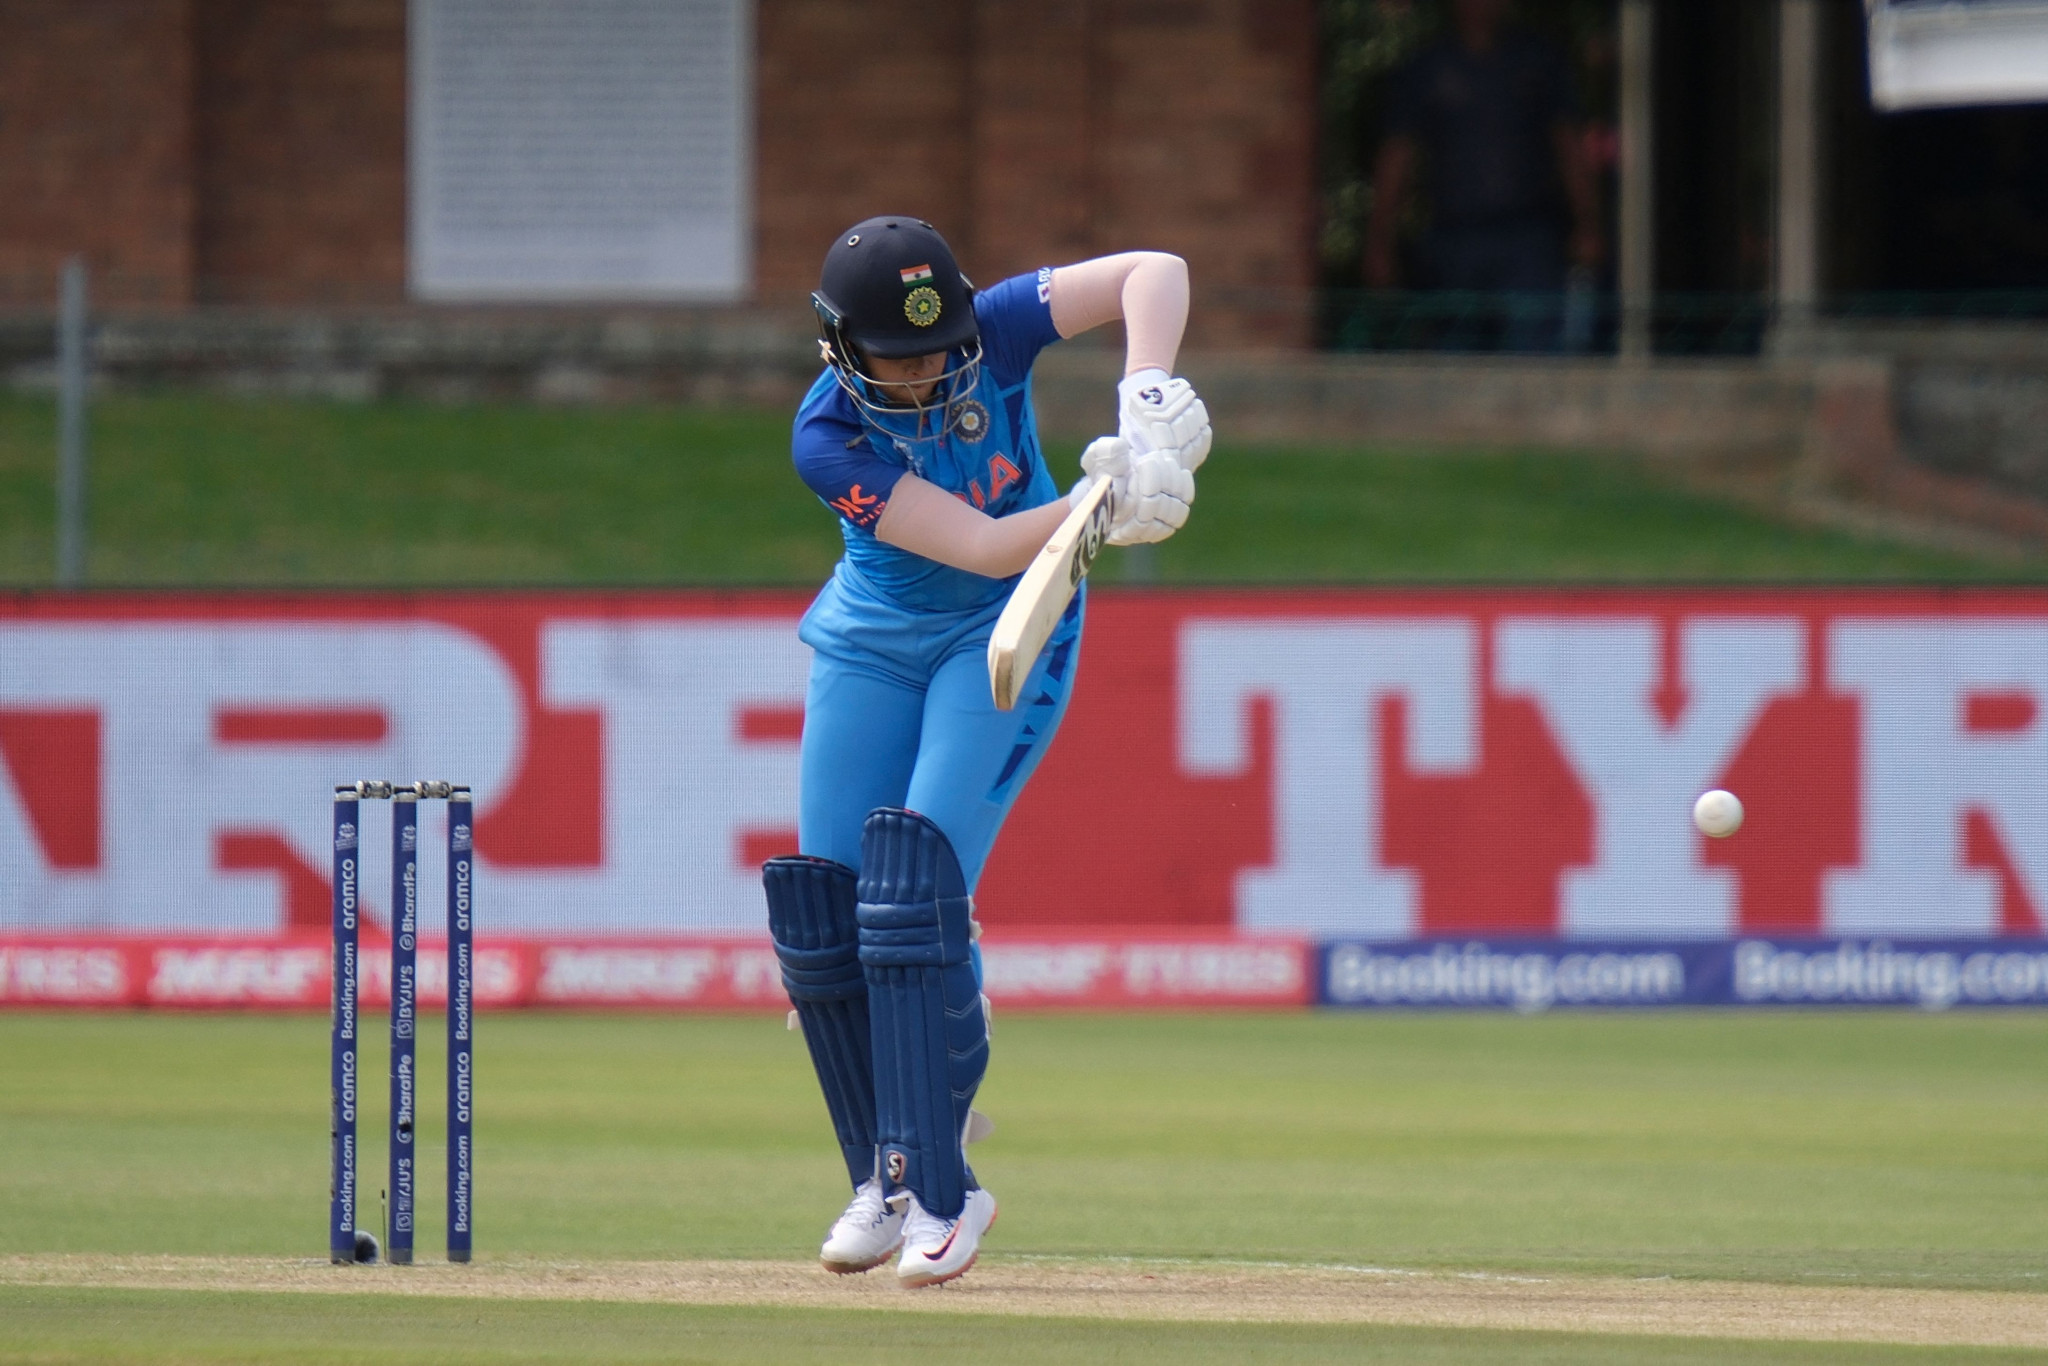 India secured a semi-final place at the ICC Women's T20 World Cup after beating Ireland in a match curtailed by rain ©Getty Images